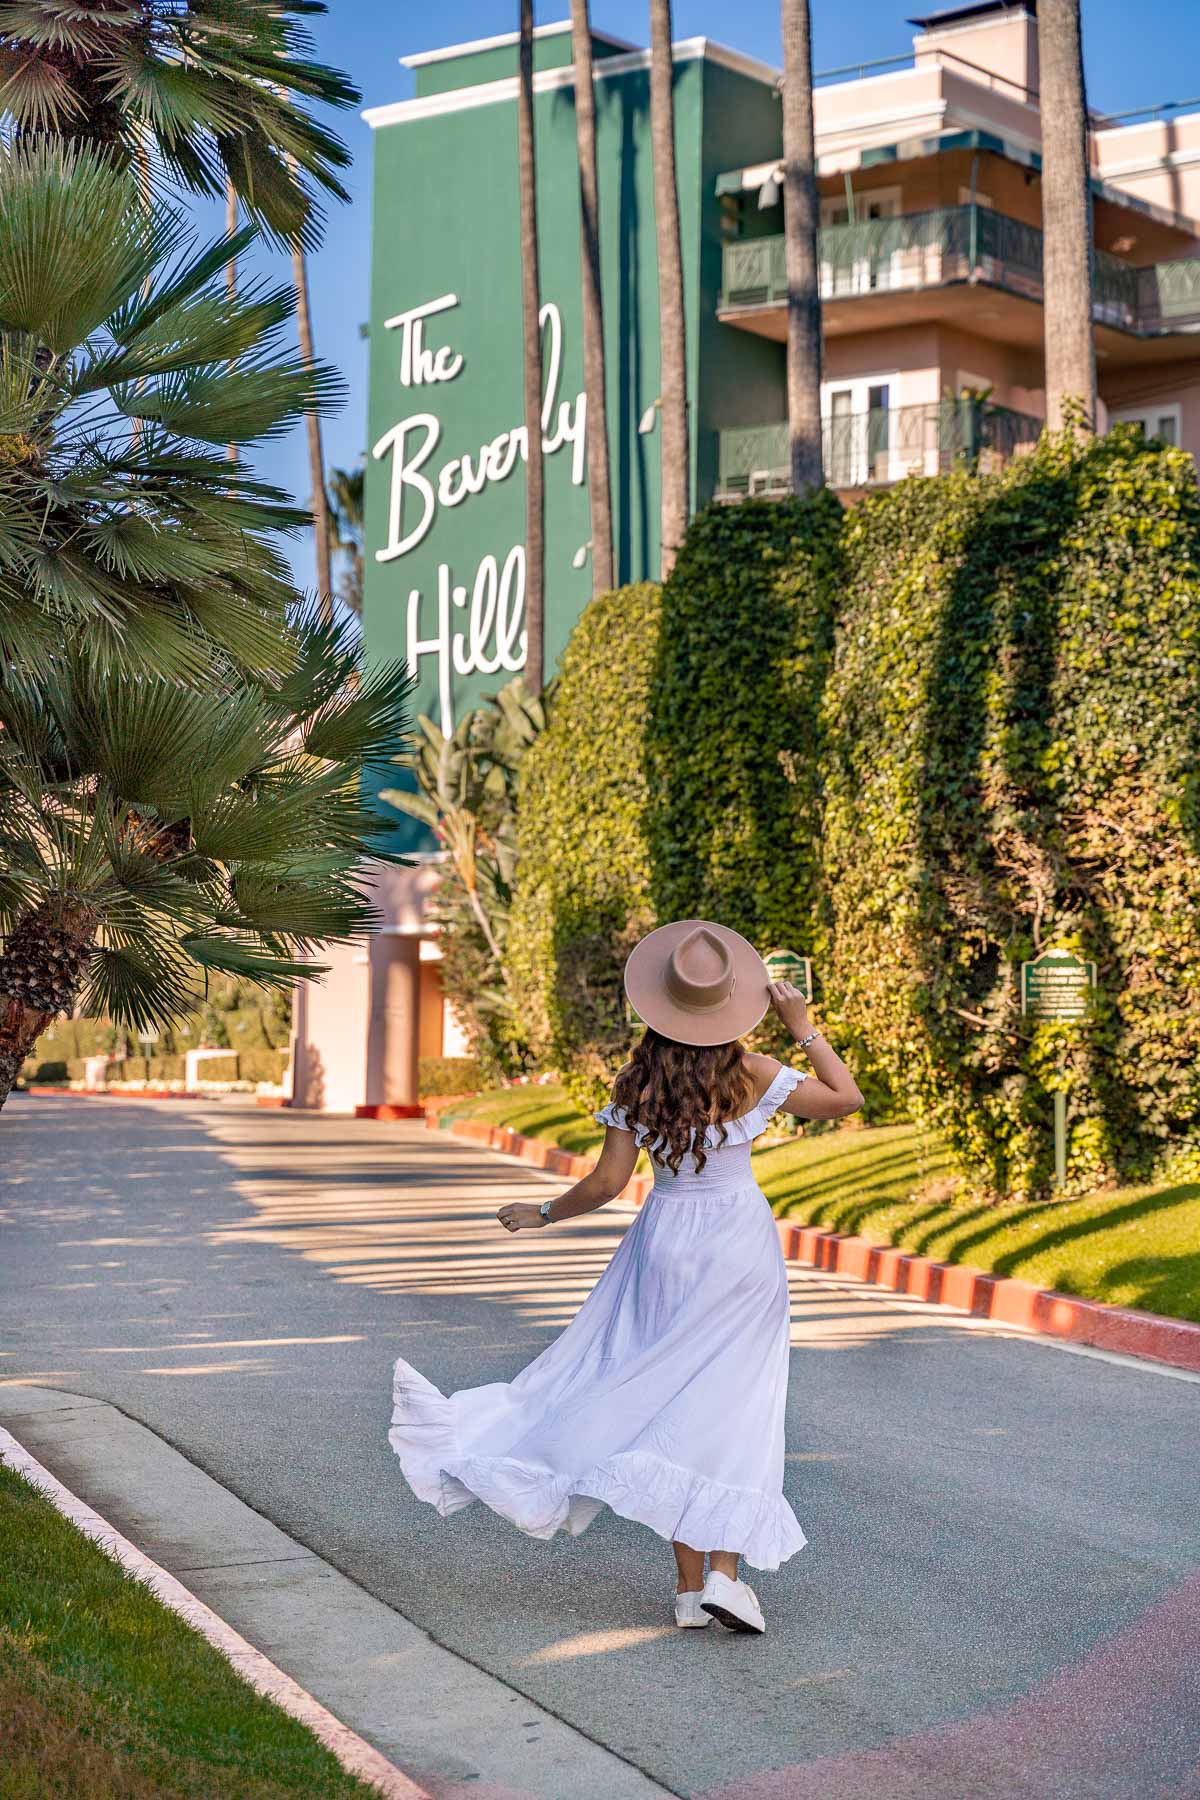 Girl in front of The Beverly Hills Hotel